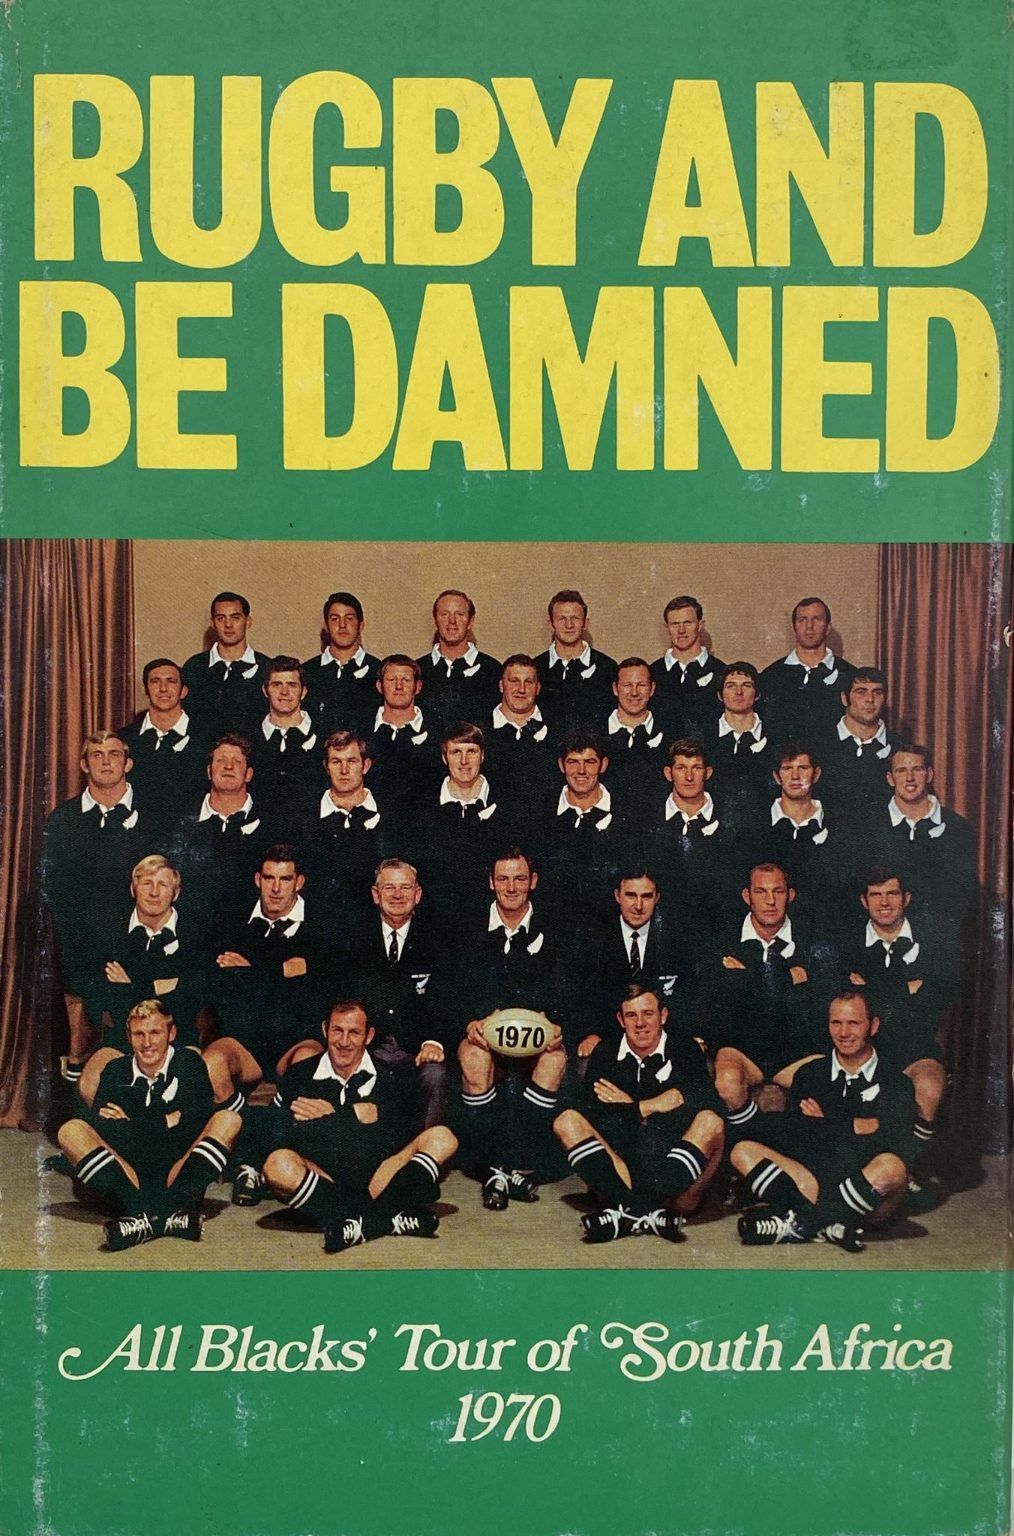 RUGBY AND BE DAMNED: The 1970 All Blacks In South Africa